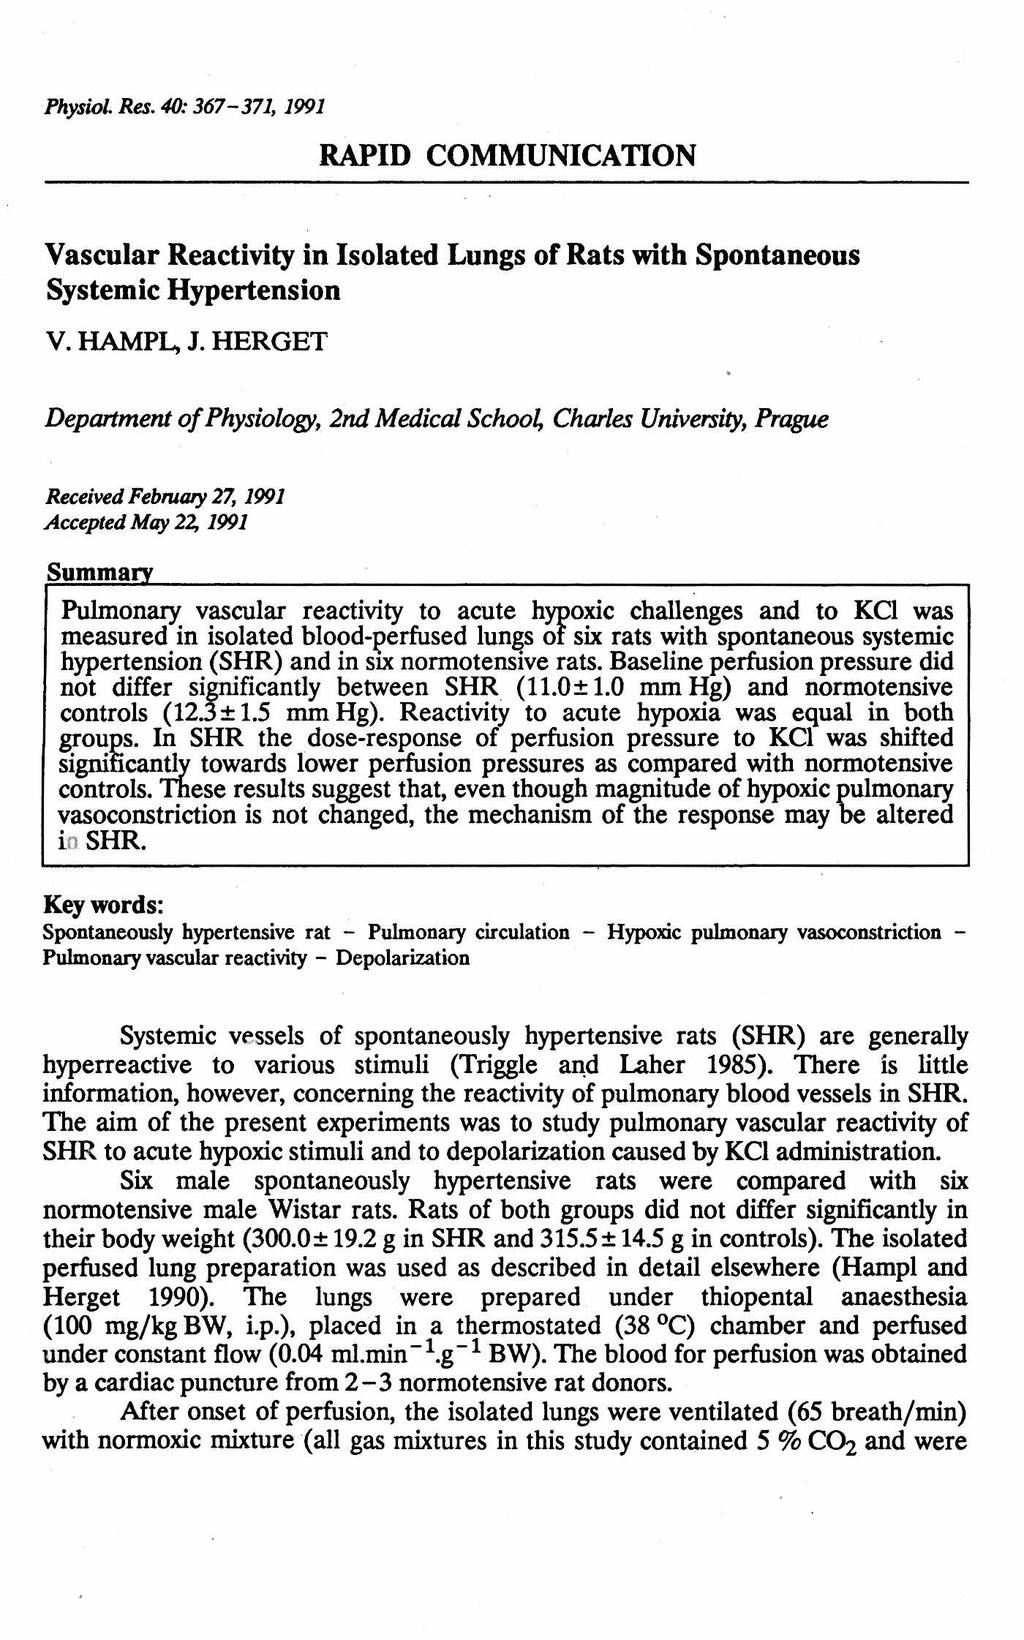 Physiol. Res. 40:367-371,1991 RAPID COMMUNICATION Vascular Reactivity in Isolated Lungs of Rats with Spontaneous Systemic Hypertension V. HAMPL, J.